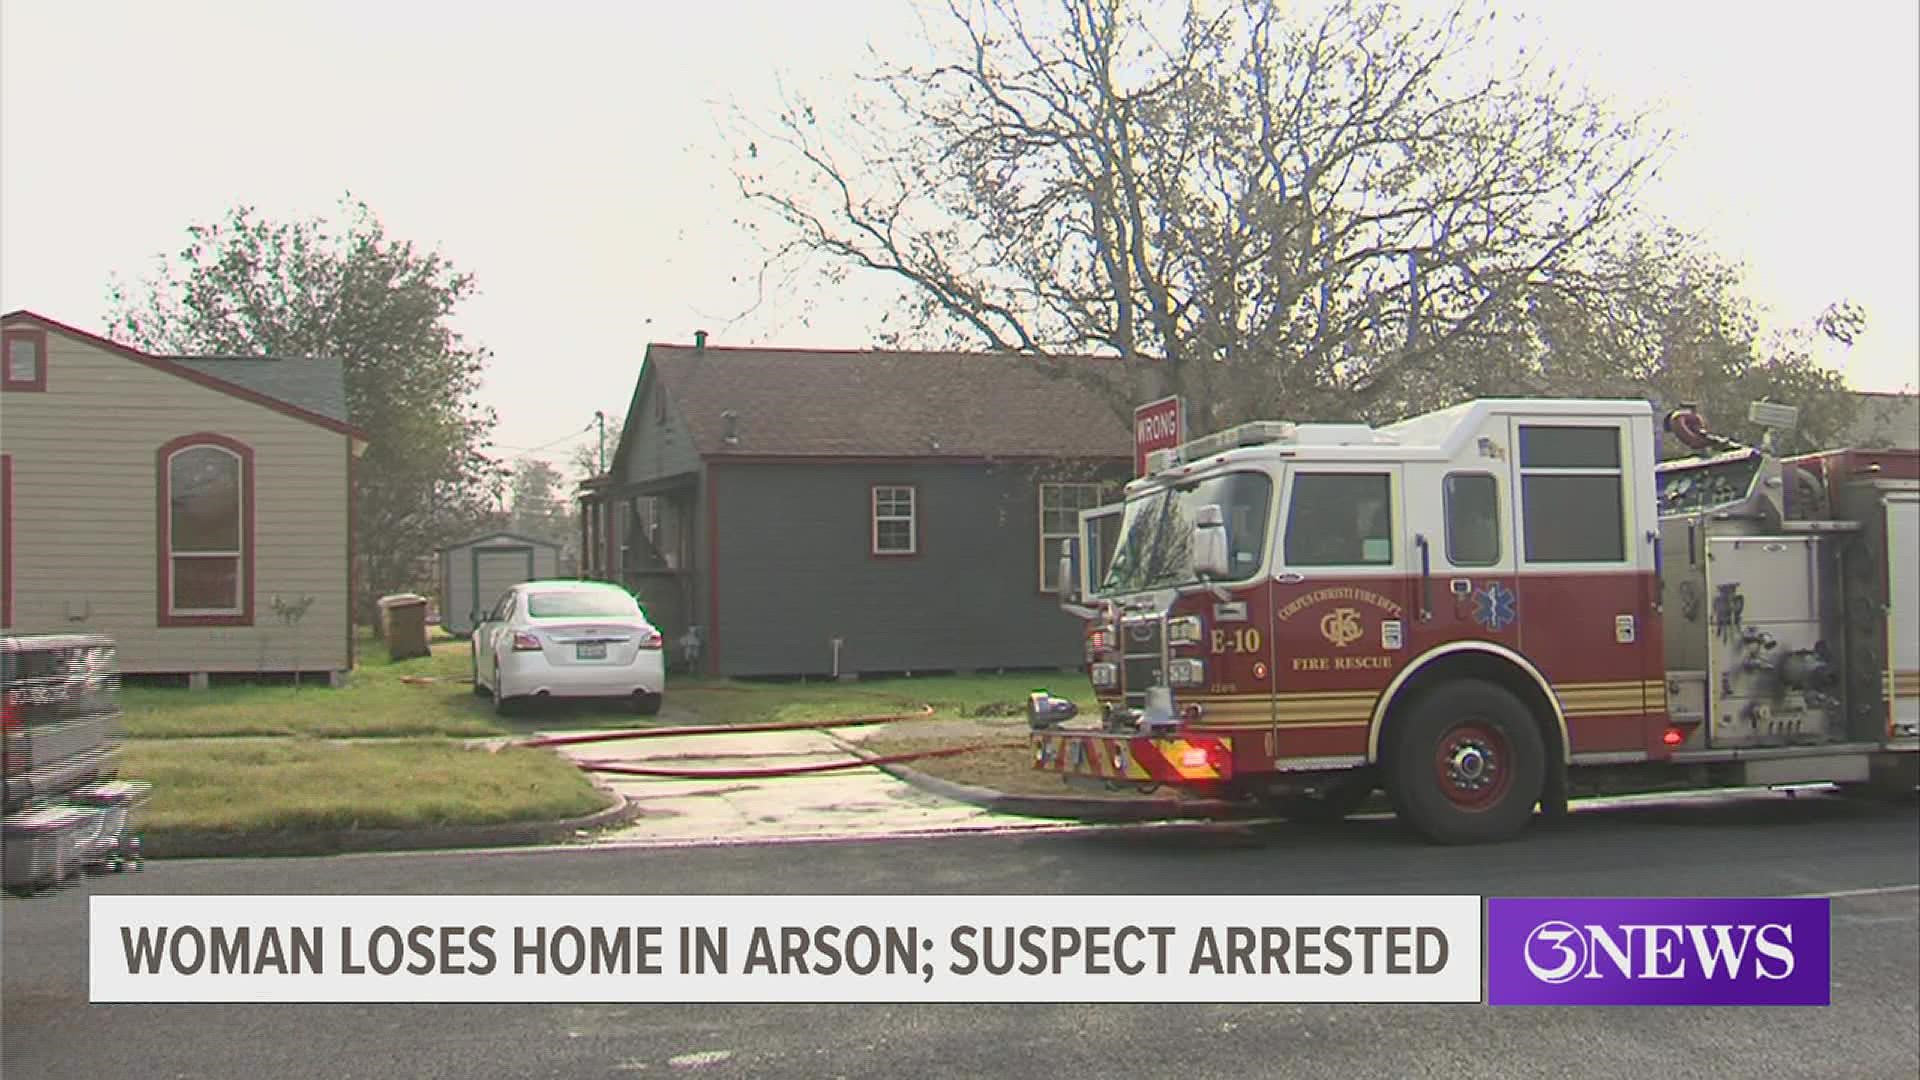 The 82-year-old grandmother was trying to get her grandson to leave the property when he set the house on fire, officials said.